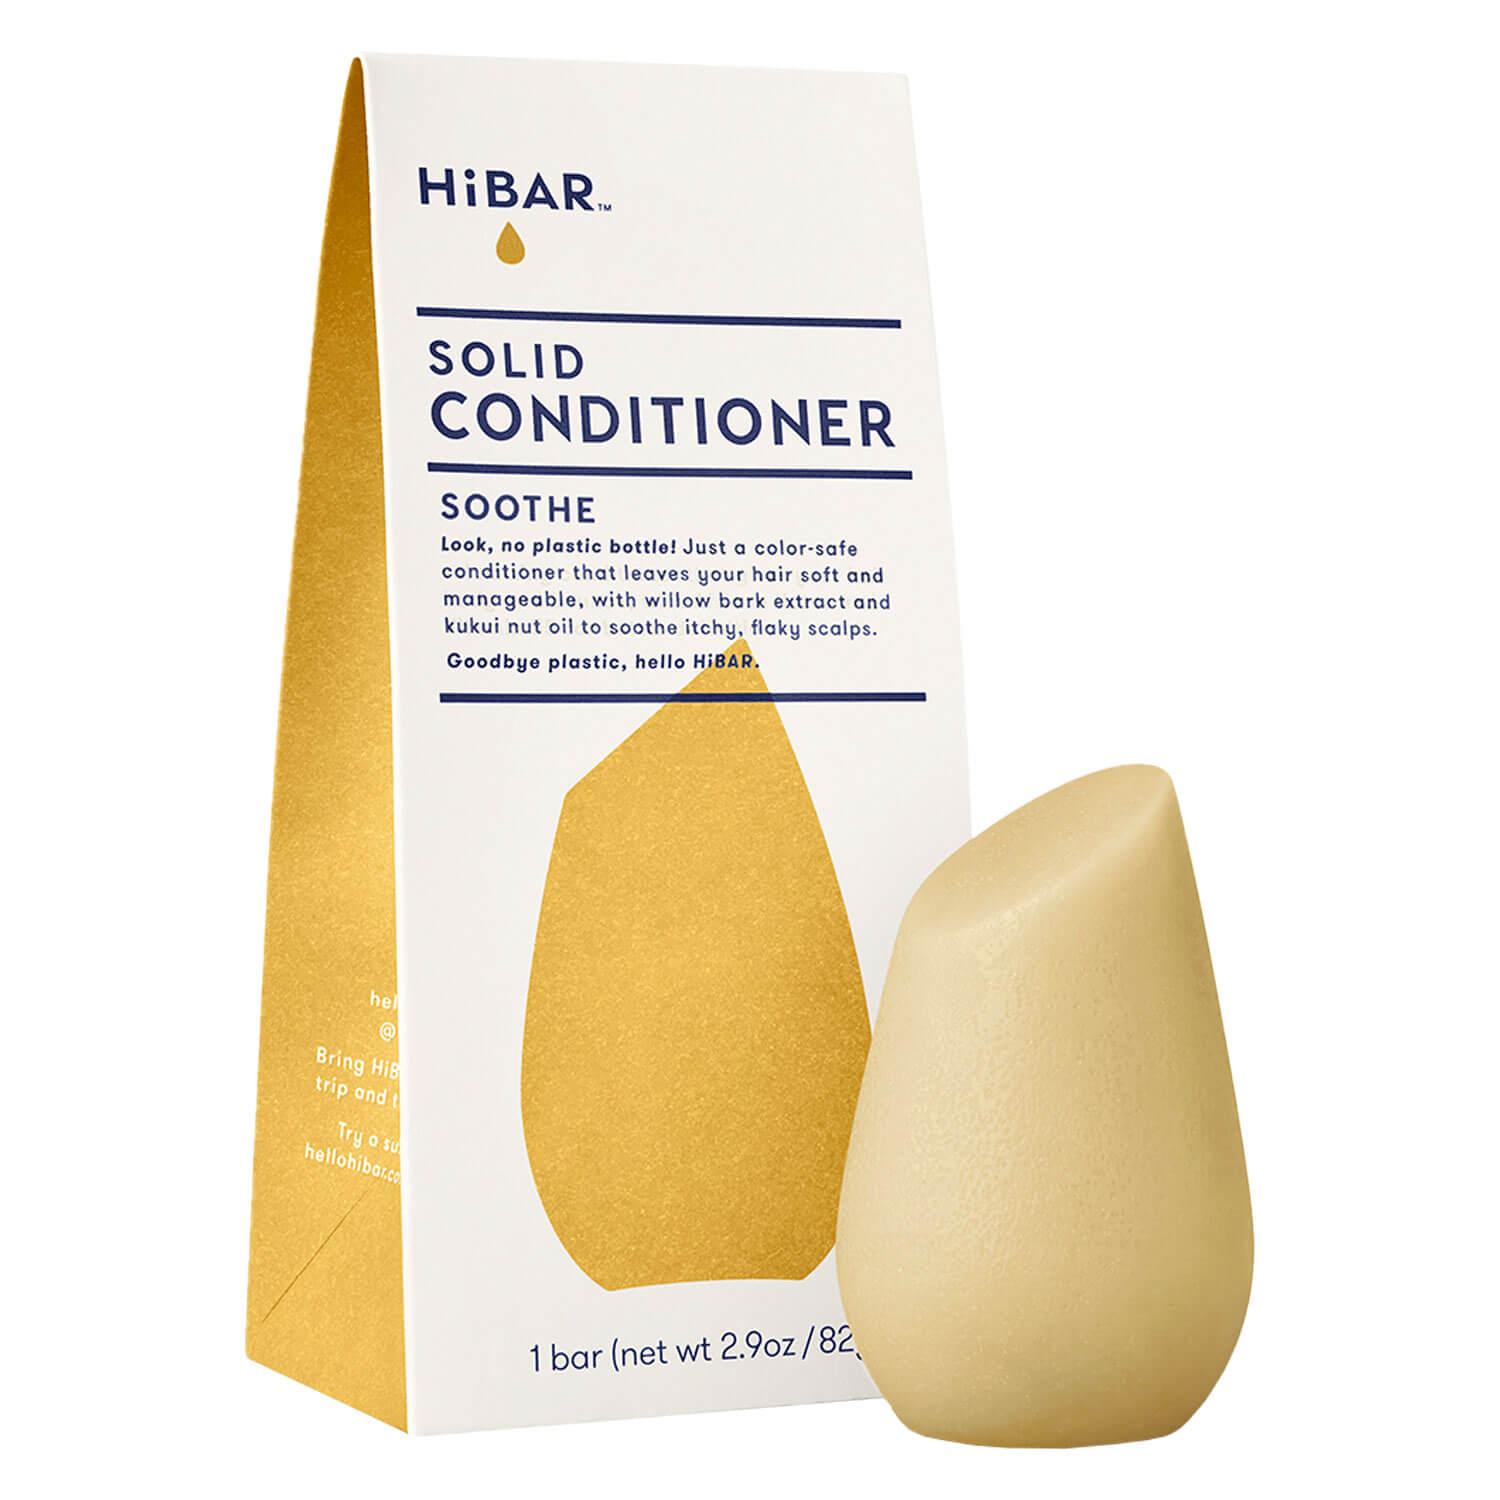 HiBAR - SOOTHE après-shampoing solide